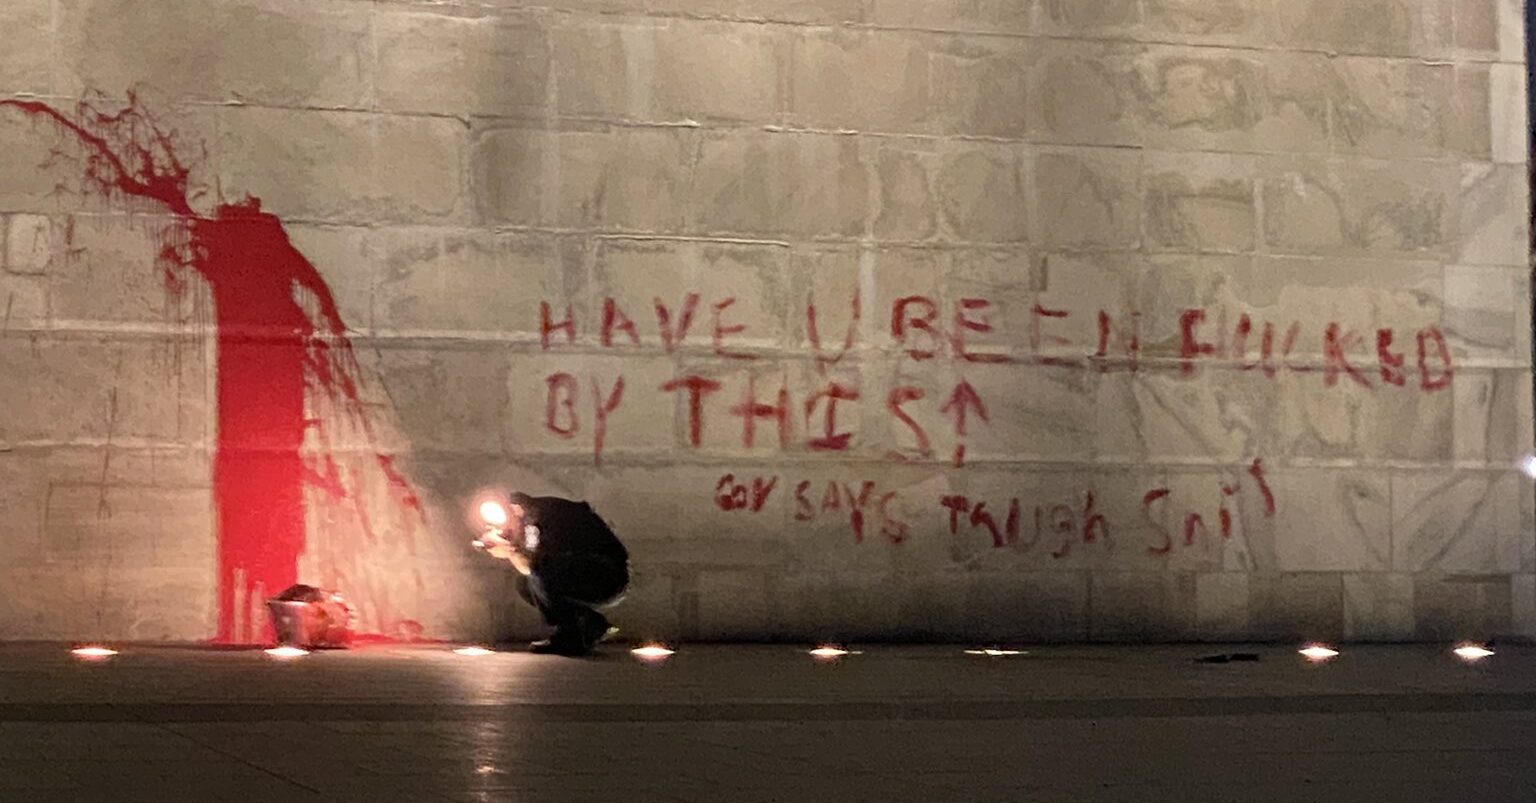 ‘Have You Been F*cked by This’: Vandal Hits Washington Monument With Message About Being Shafted by Uncle Sam